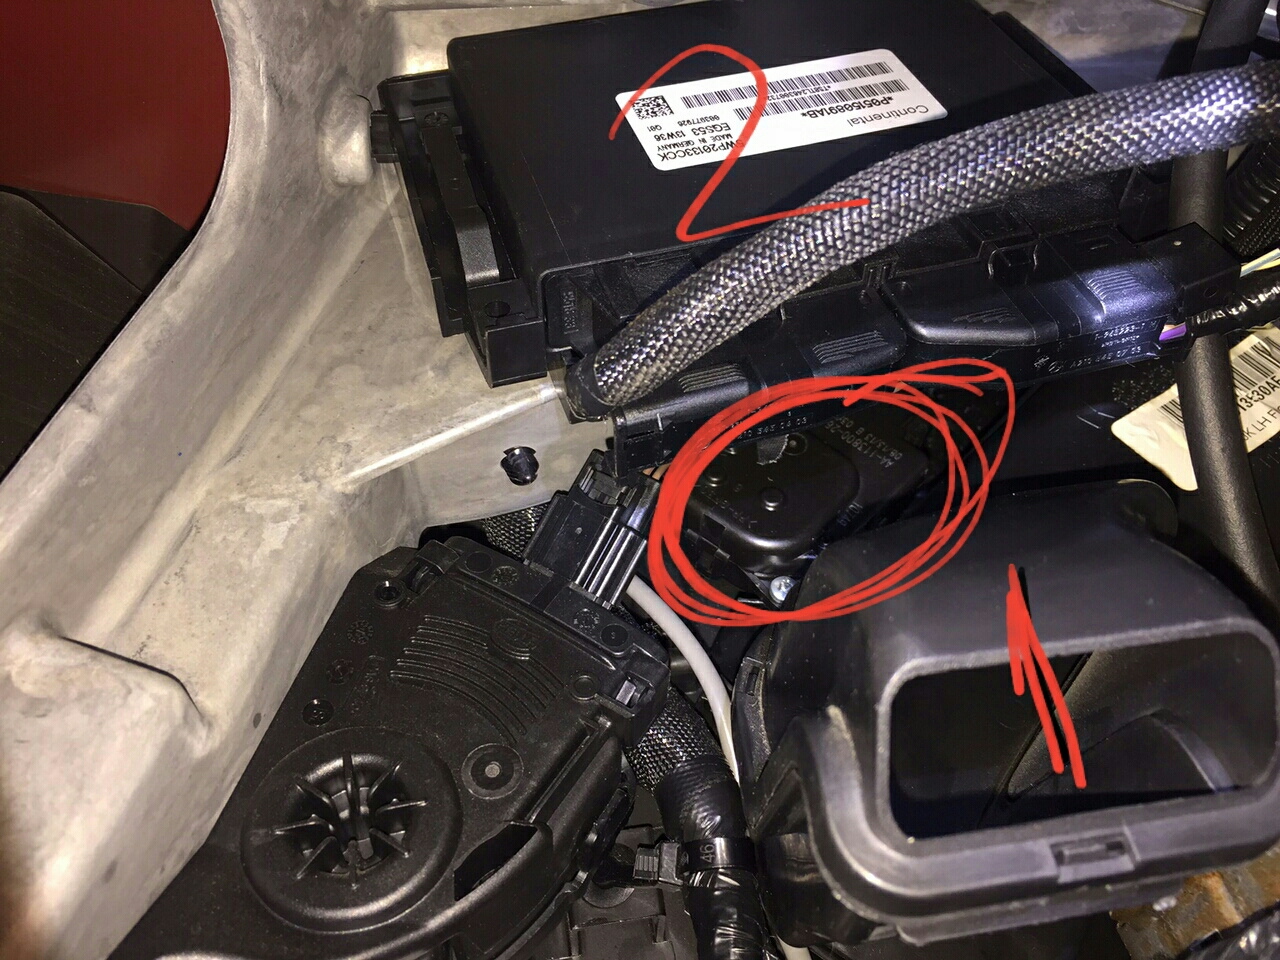 Hvac control issues,blinking light and no heat fixed(for now)   - The top destination for Jeep JK and JL Wrangler news, rumors, and  discussion